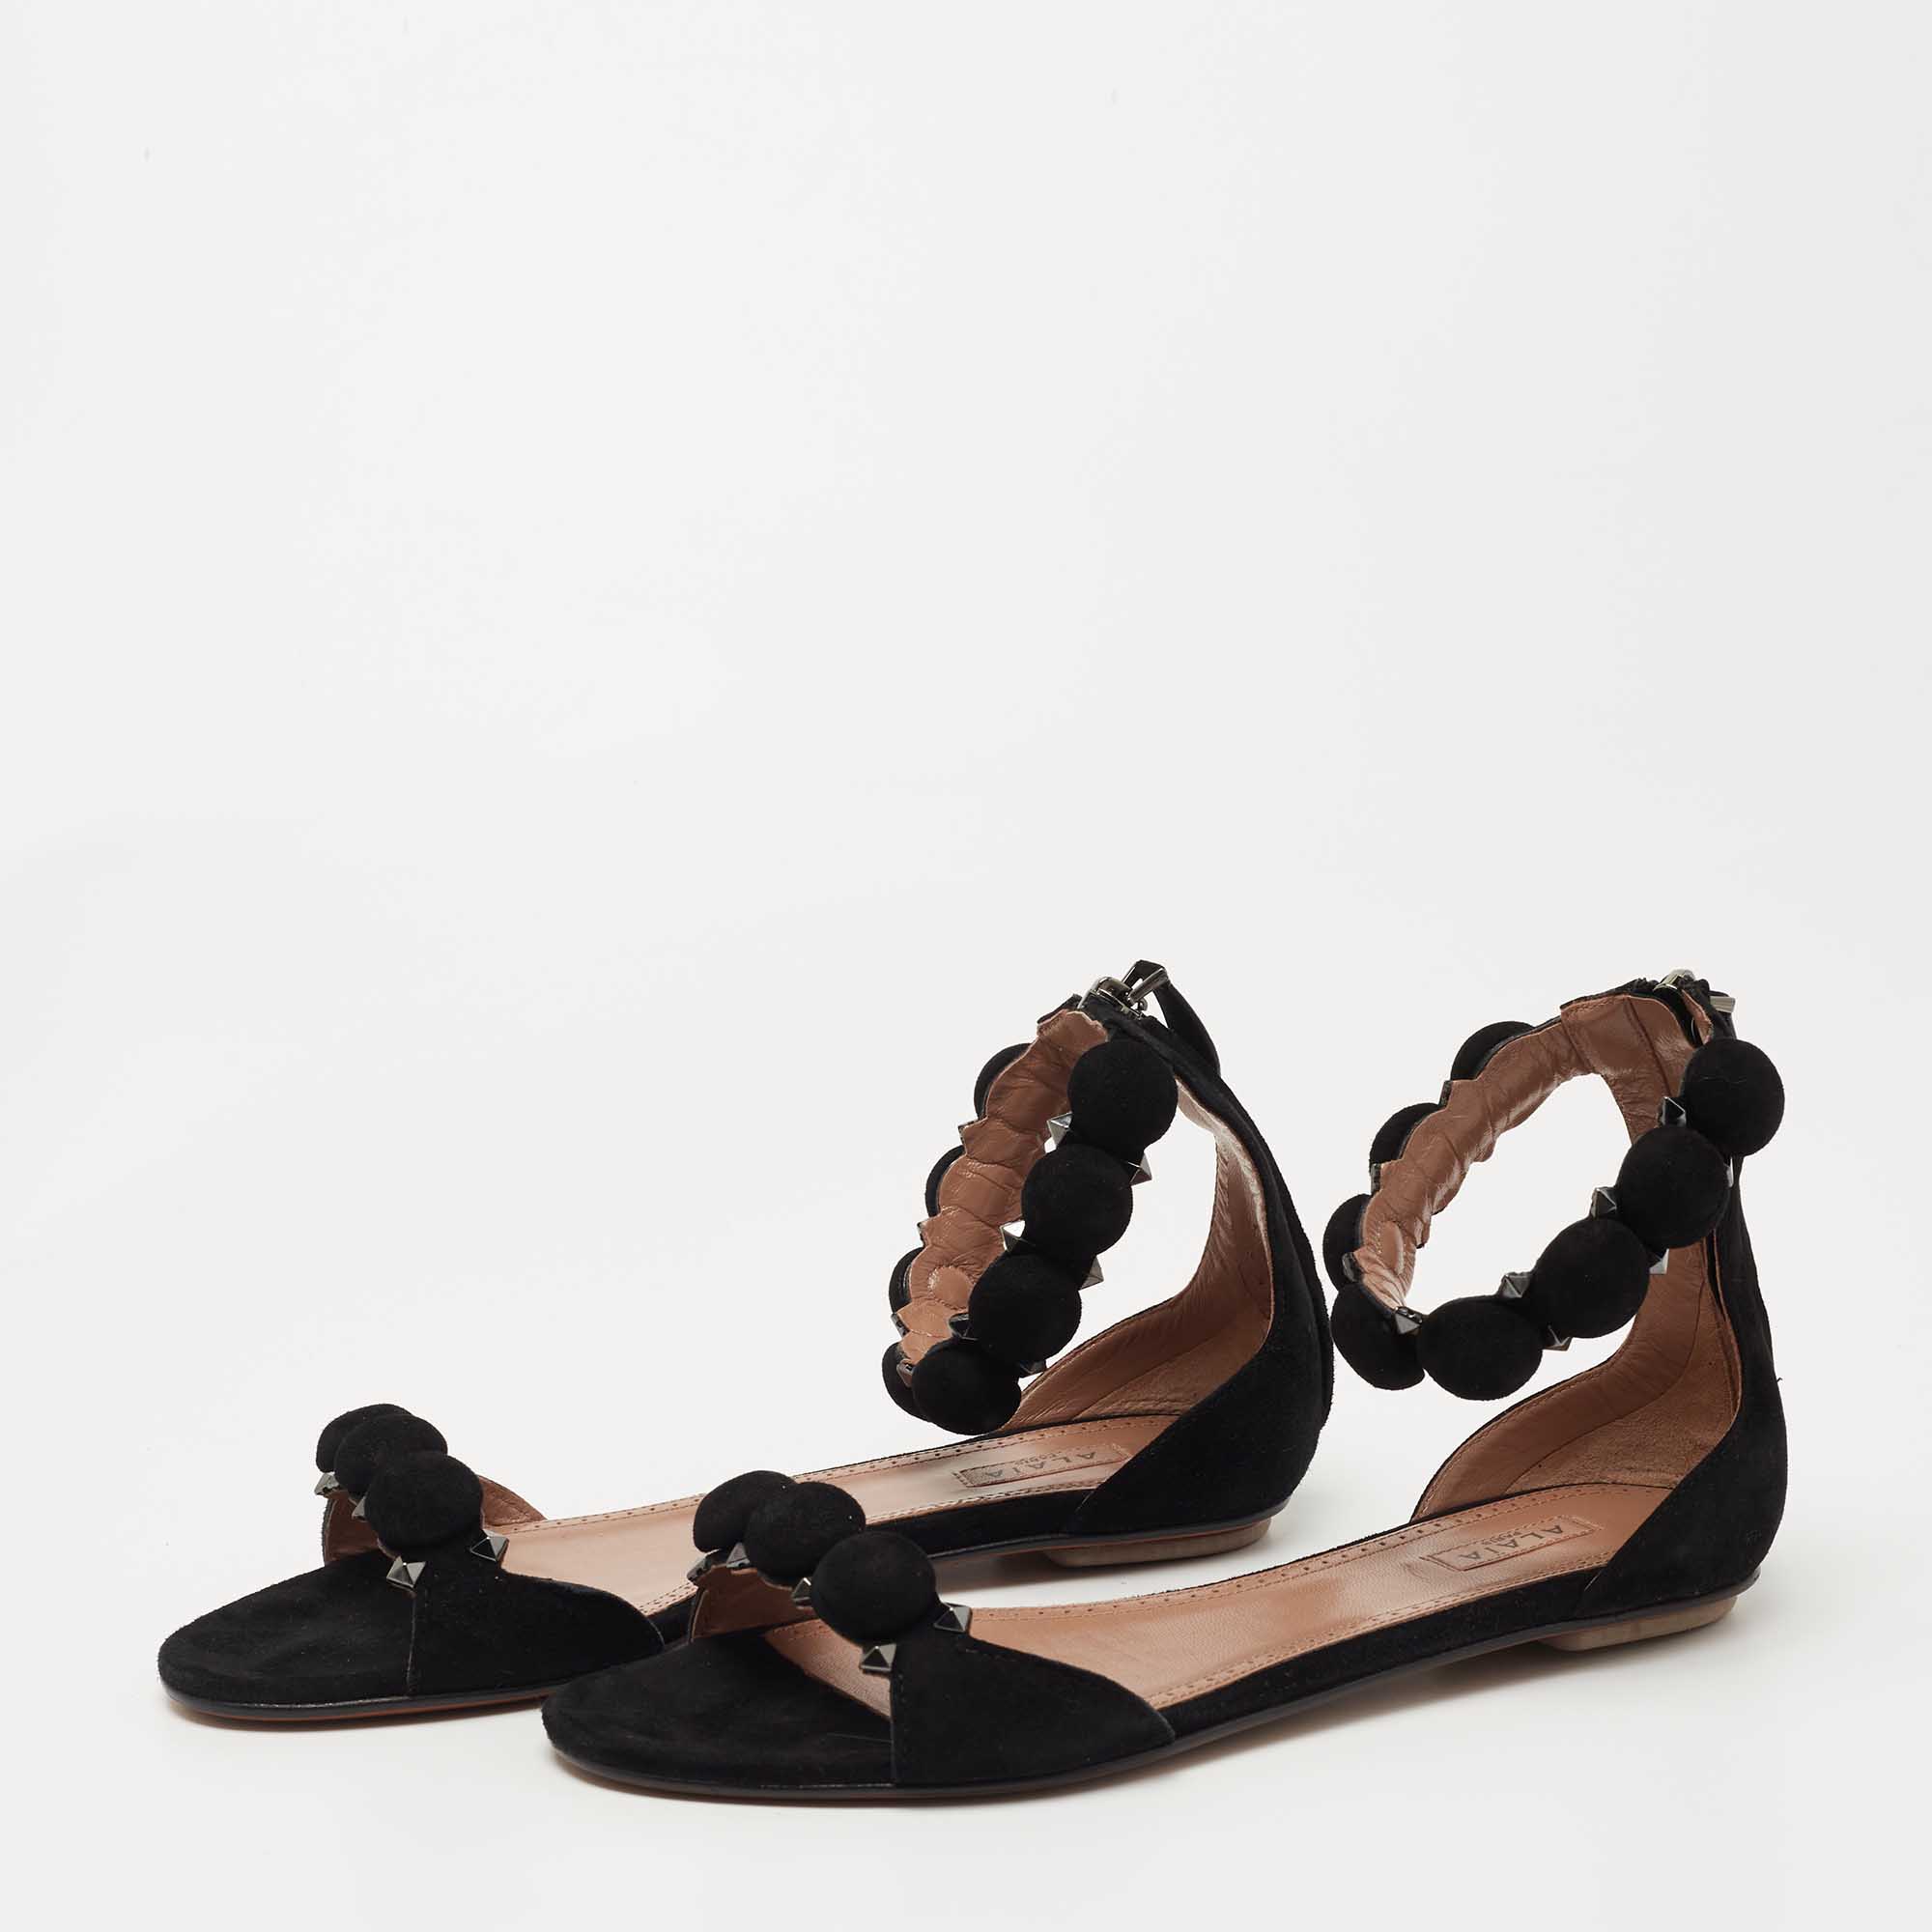 

Alaia Black Suede Bombe Ankle Strap Flat Sandals Size